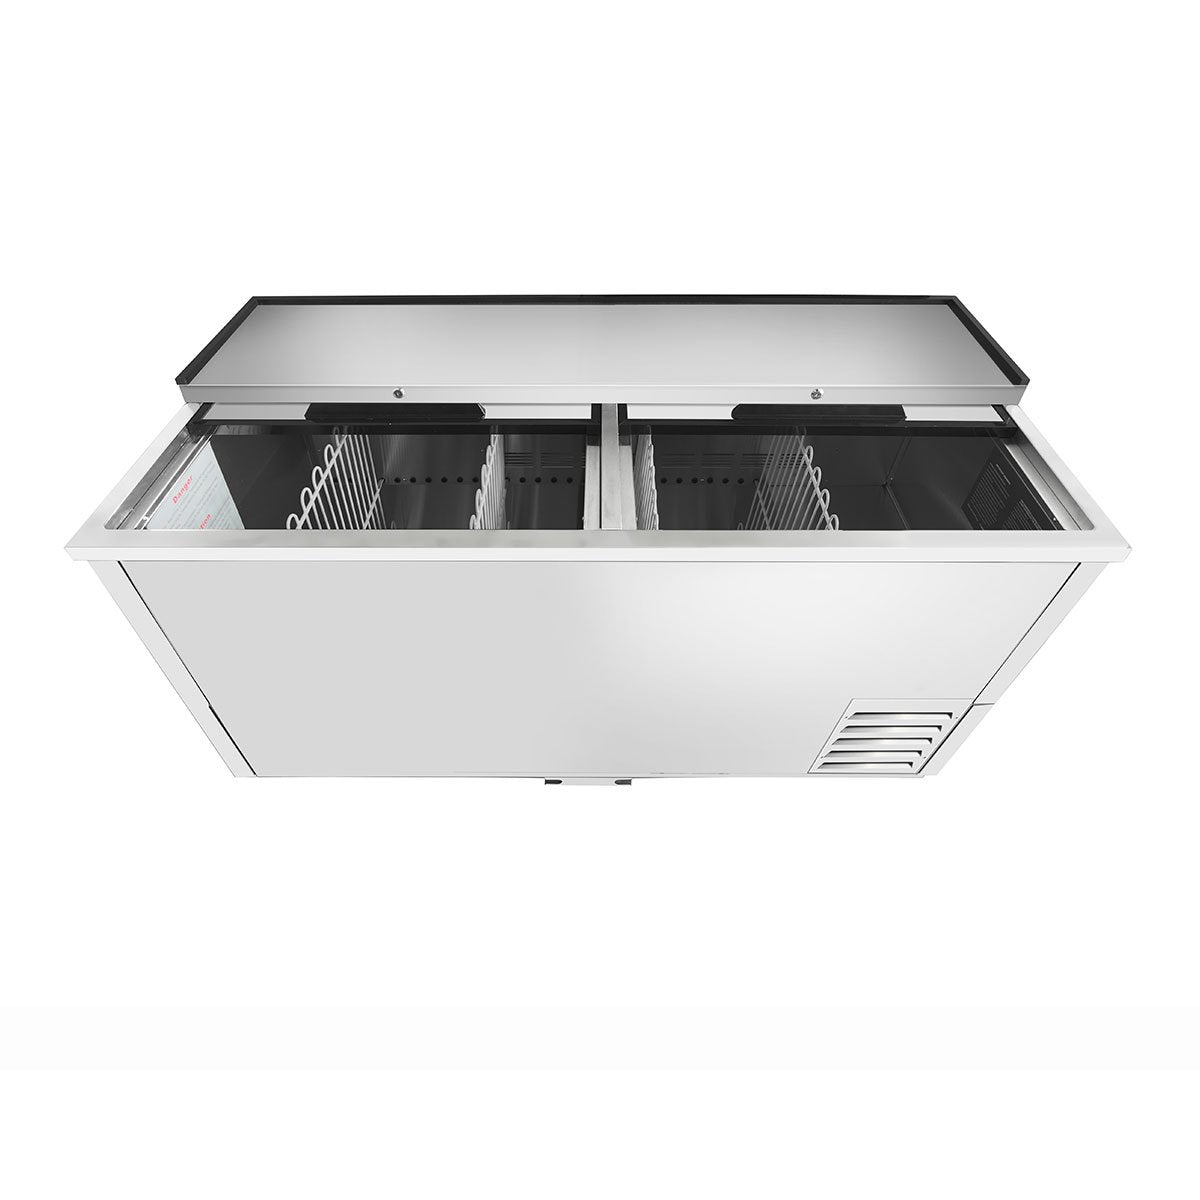 Atosa MBC65GR 65" Bottle Cooler - Stainless Steel